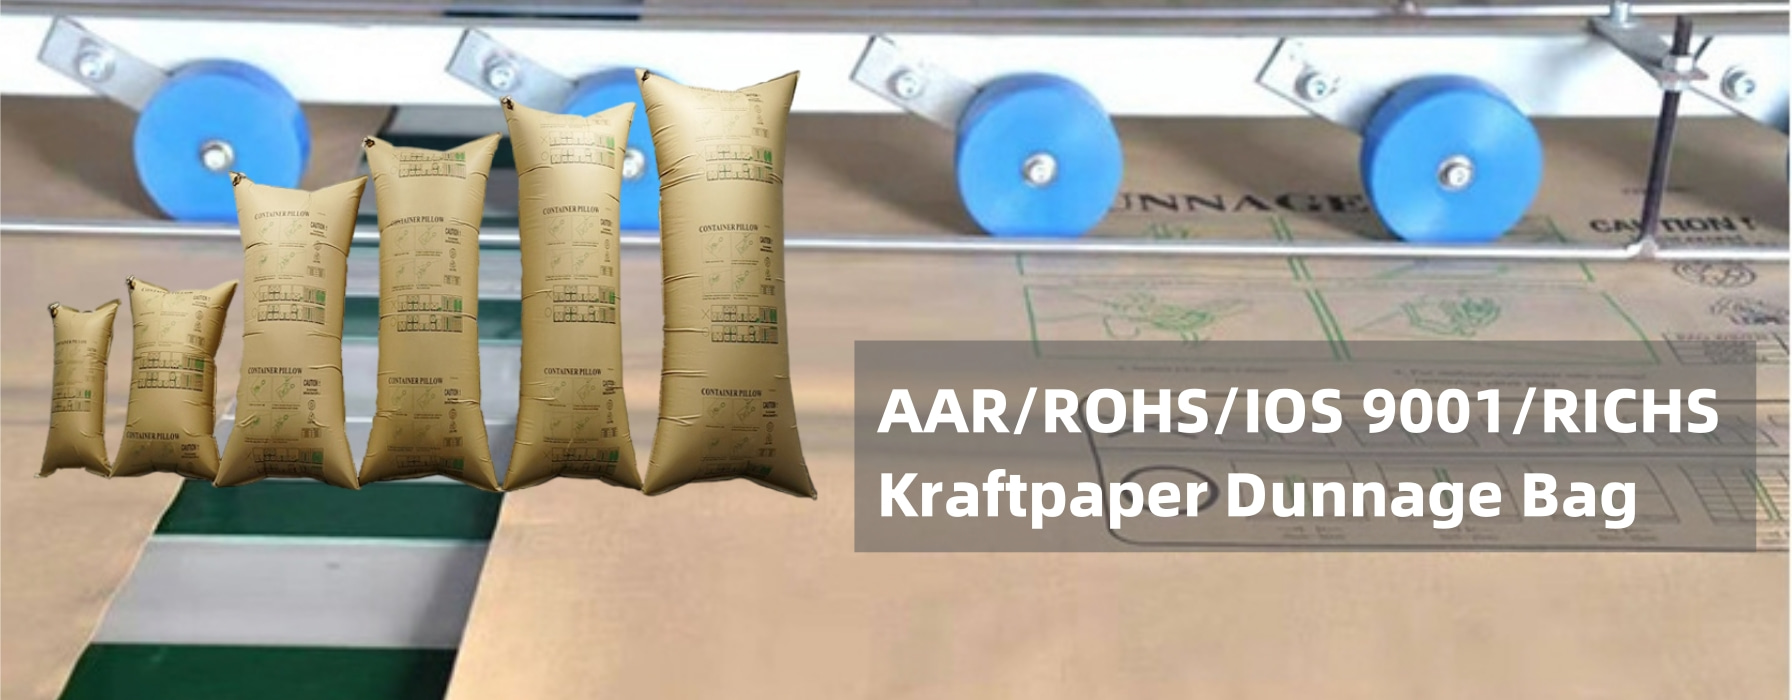 kraft paper dunnage bags